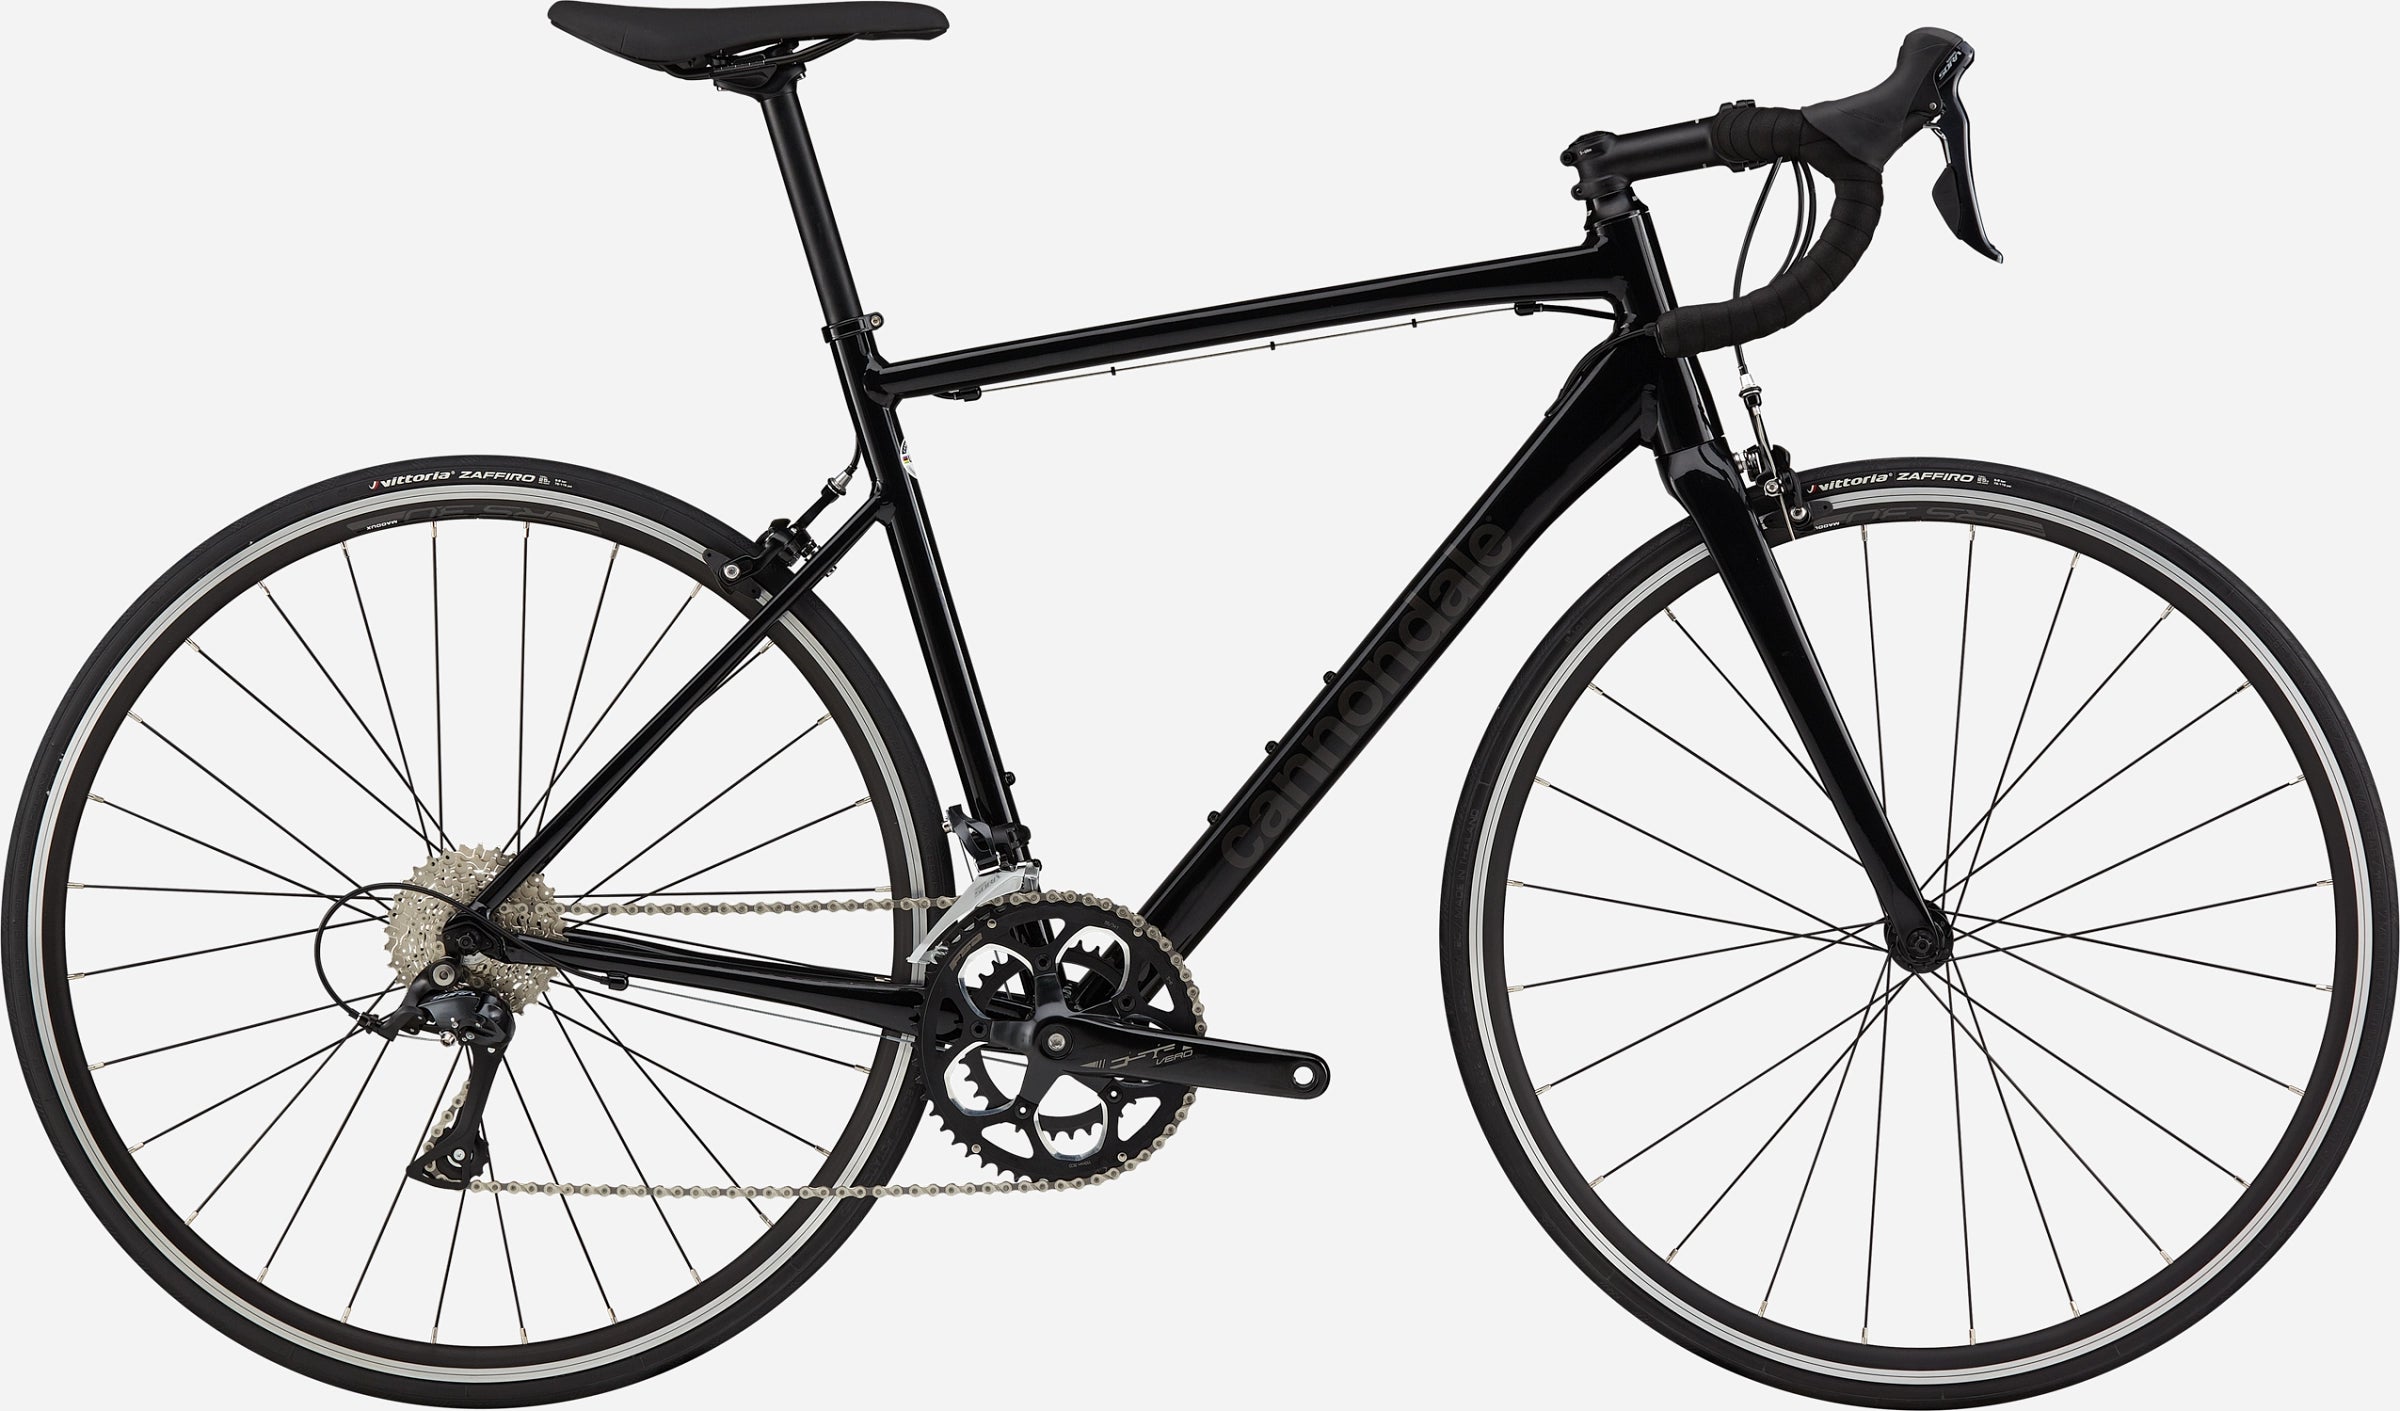 Paint for 2020 Cannondale CAAD Optimo 3 (C14301M) - Gloss Black